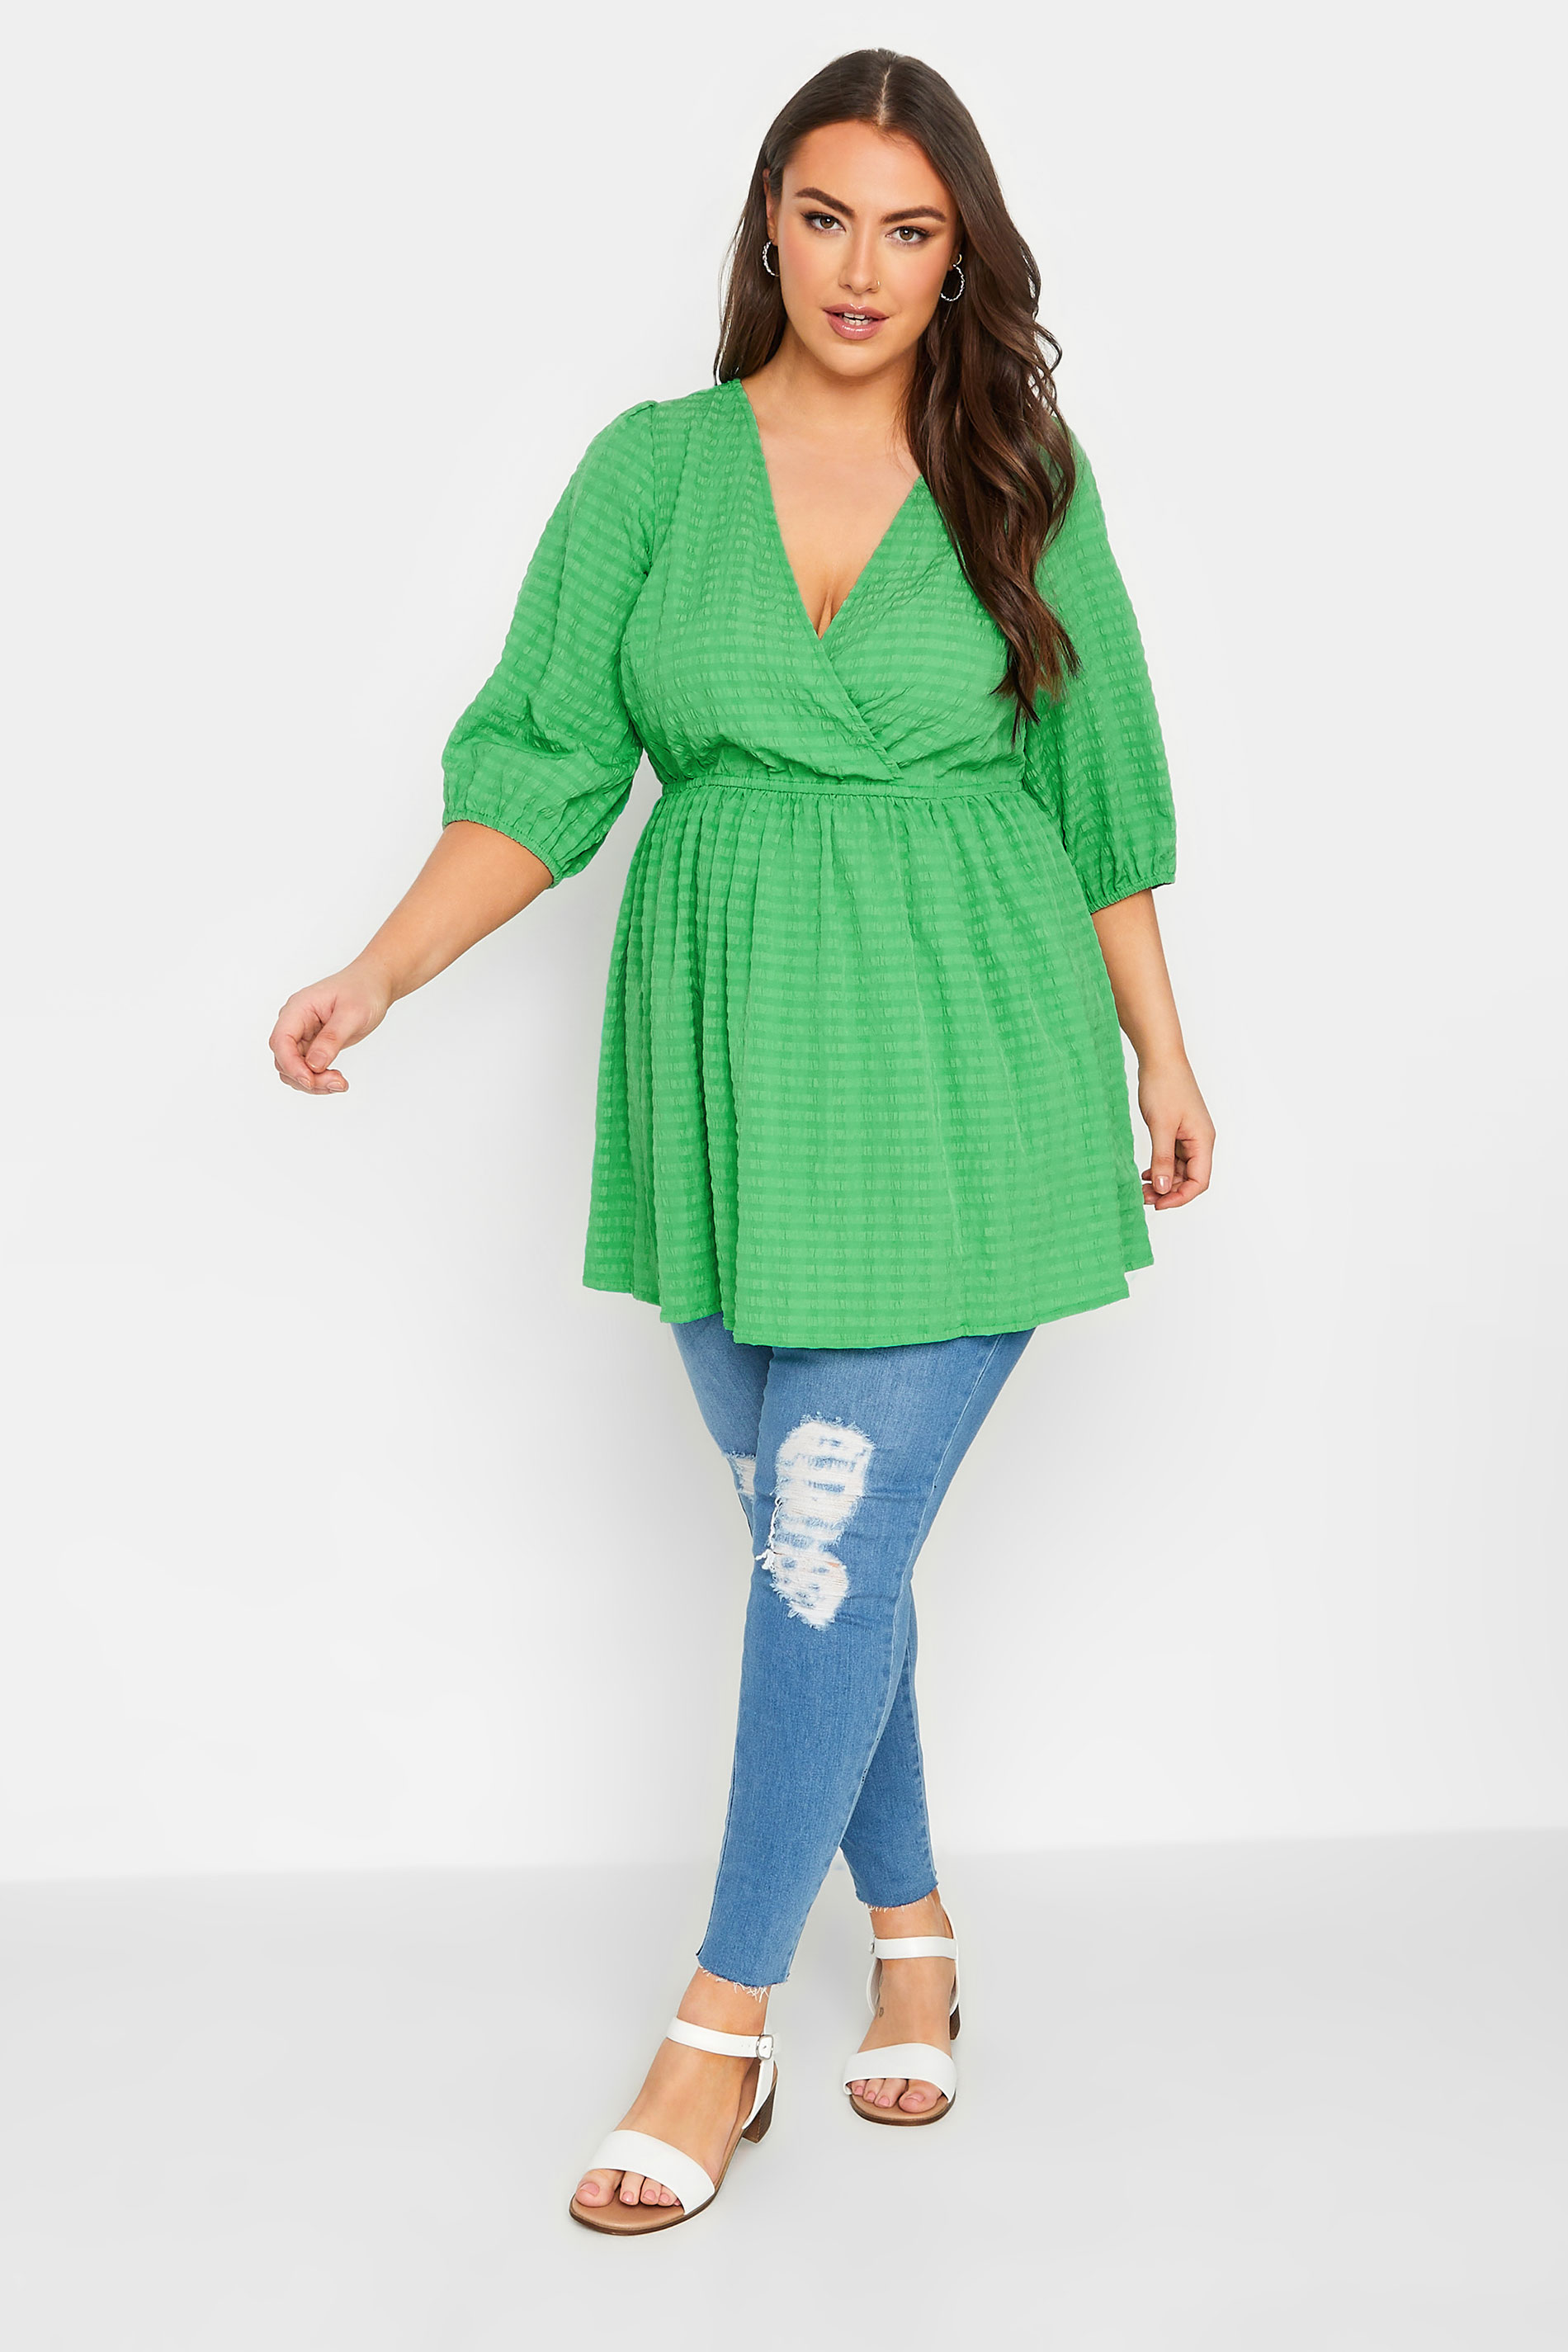 YOURS Curve Plus Size Green Textured Wrap Top | Yours Clothing  2